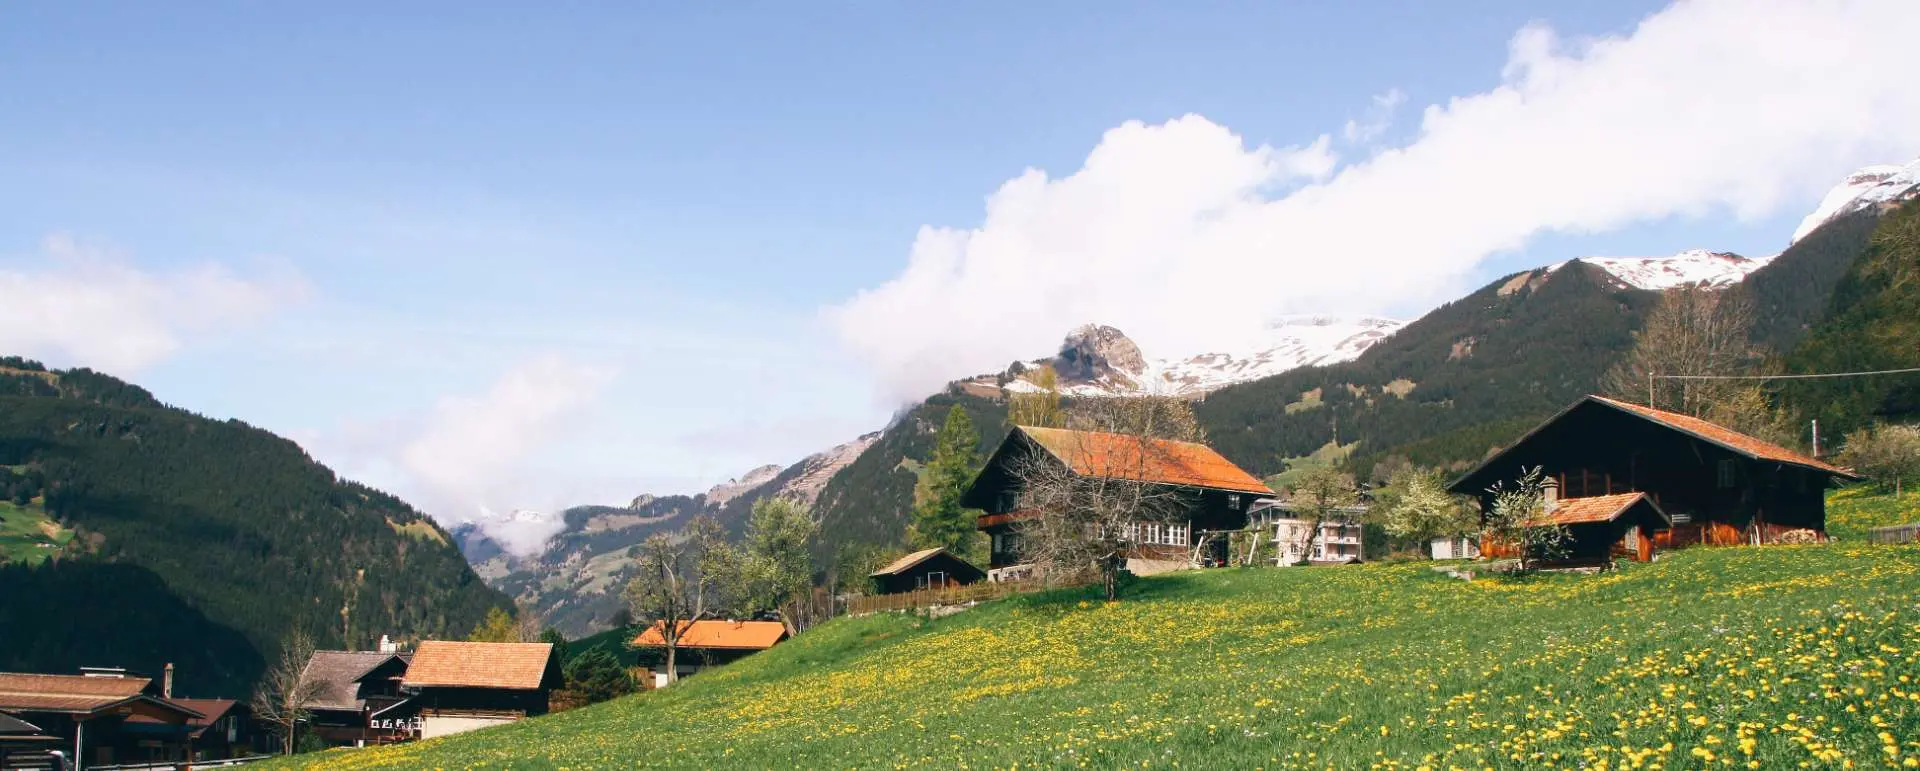 Bernese Highlands - the destination for bus trips